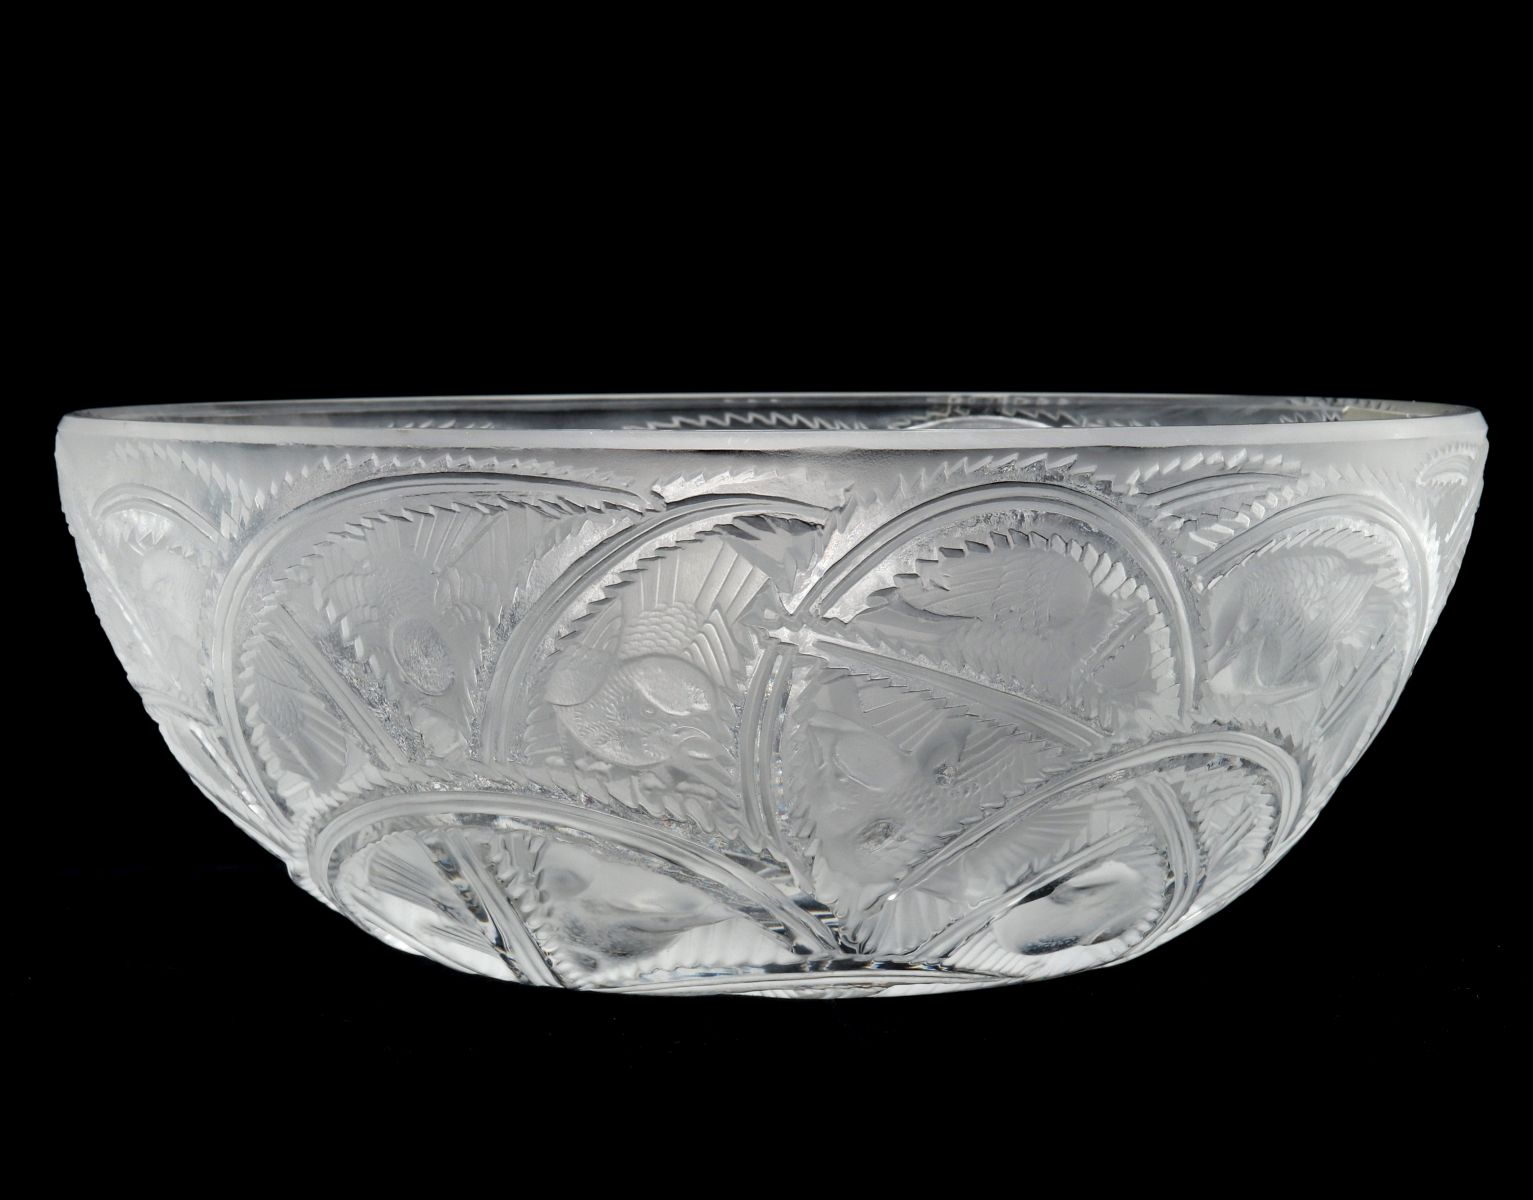 A LALIQUE 'PINSONS' PATTERN CRYSTAL BOWL